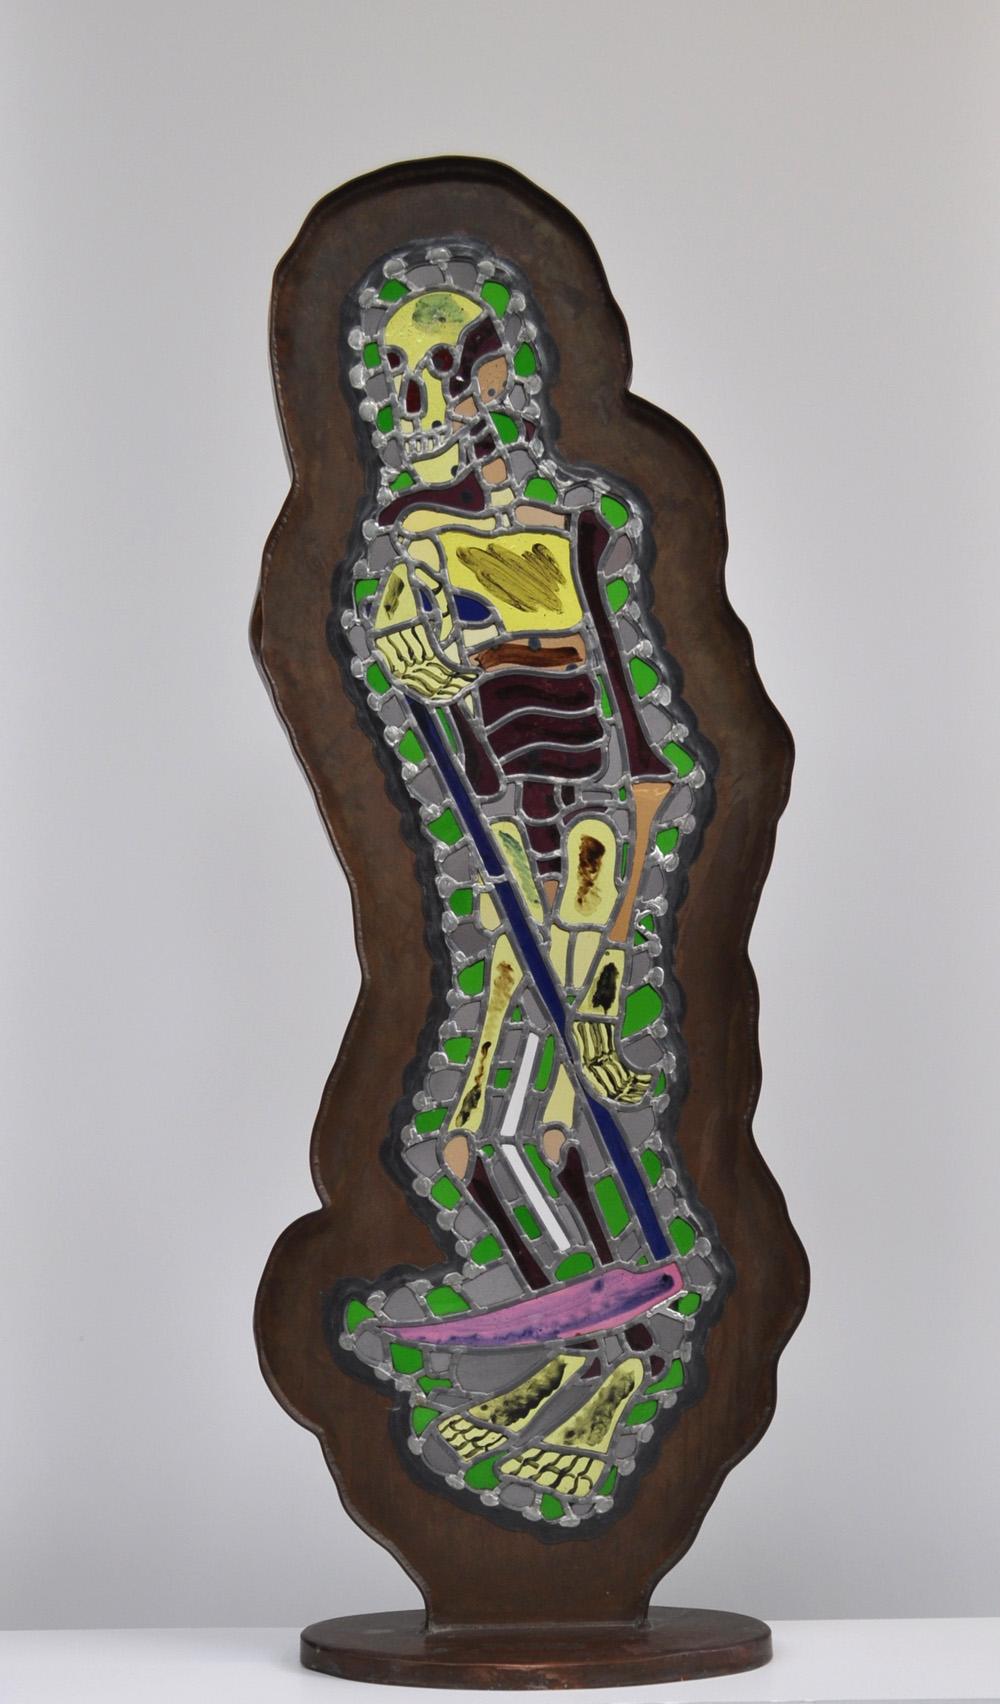 Bjørn Nørgaard, freestanding glass mosaic with copper frame, 1989
"Manden med leeen/Høstmanden"
"The Man with the Scythe/The Reaper"
137 cm H x 50 cm W x 26 cm D

Preliminary work for the decoration: "Pavillon", Tuborg - Fredericia Brewery,